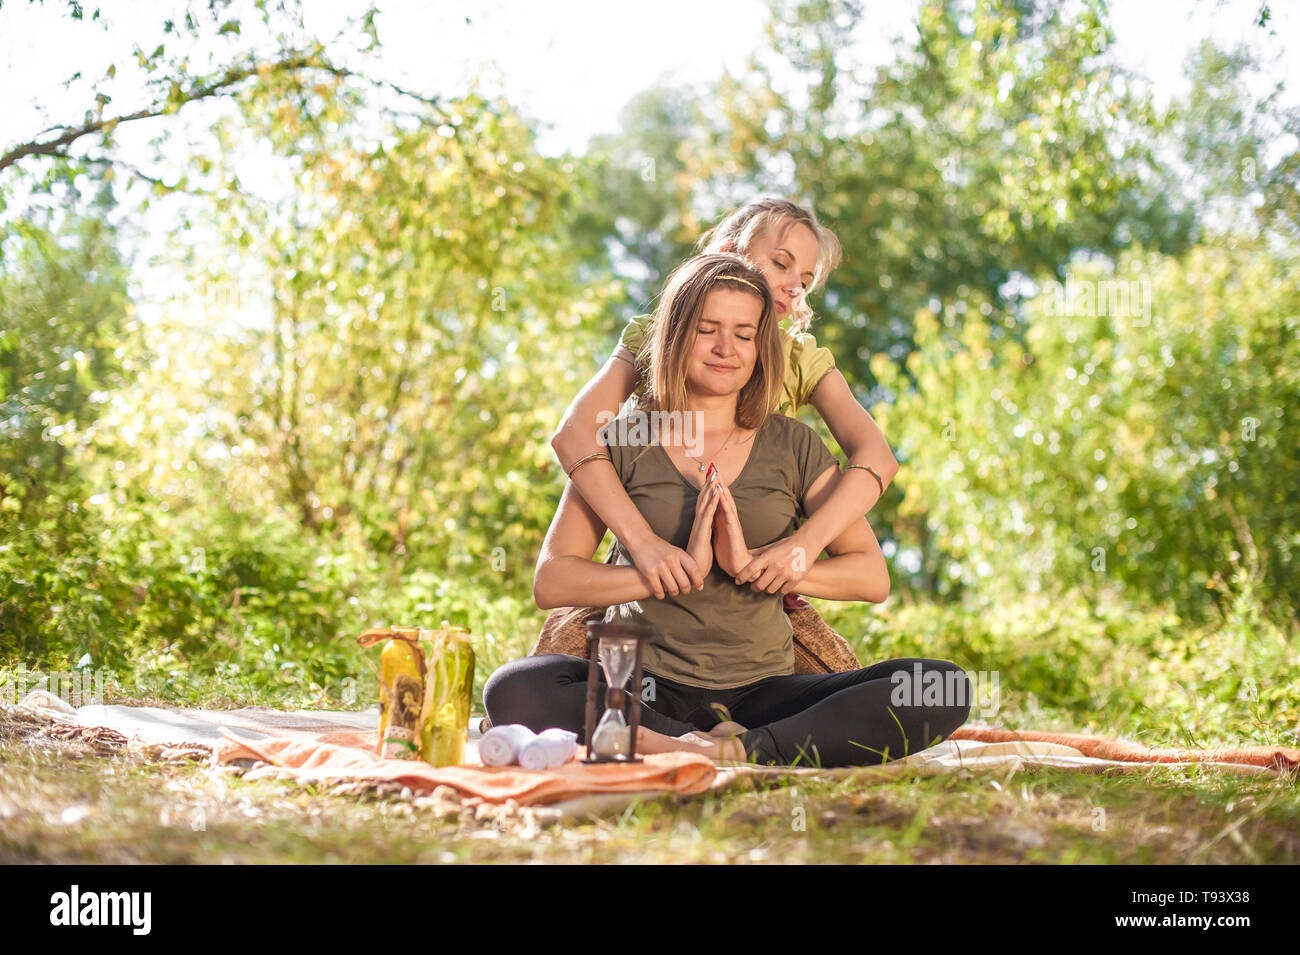 Girl on massage in nature with massage therapist. Stock Photo